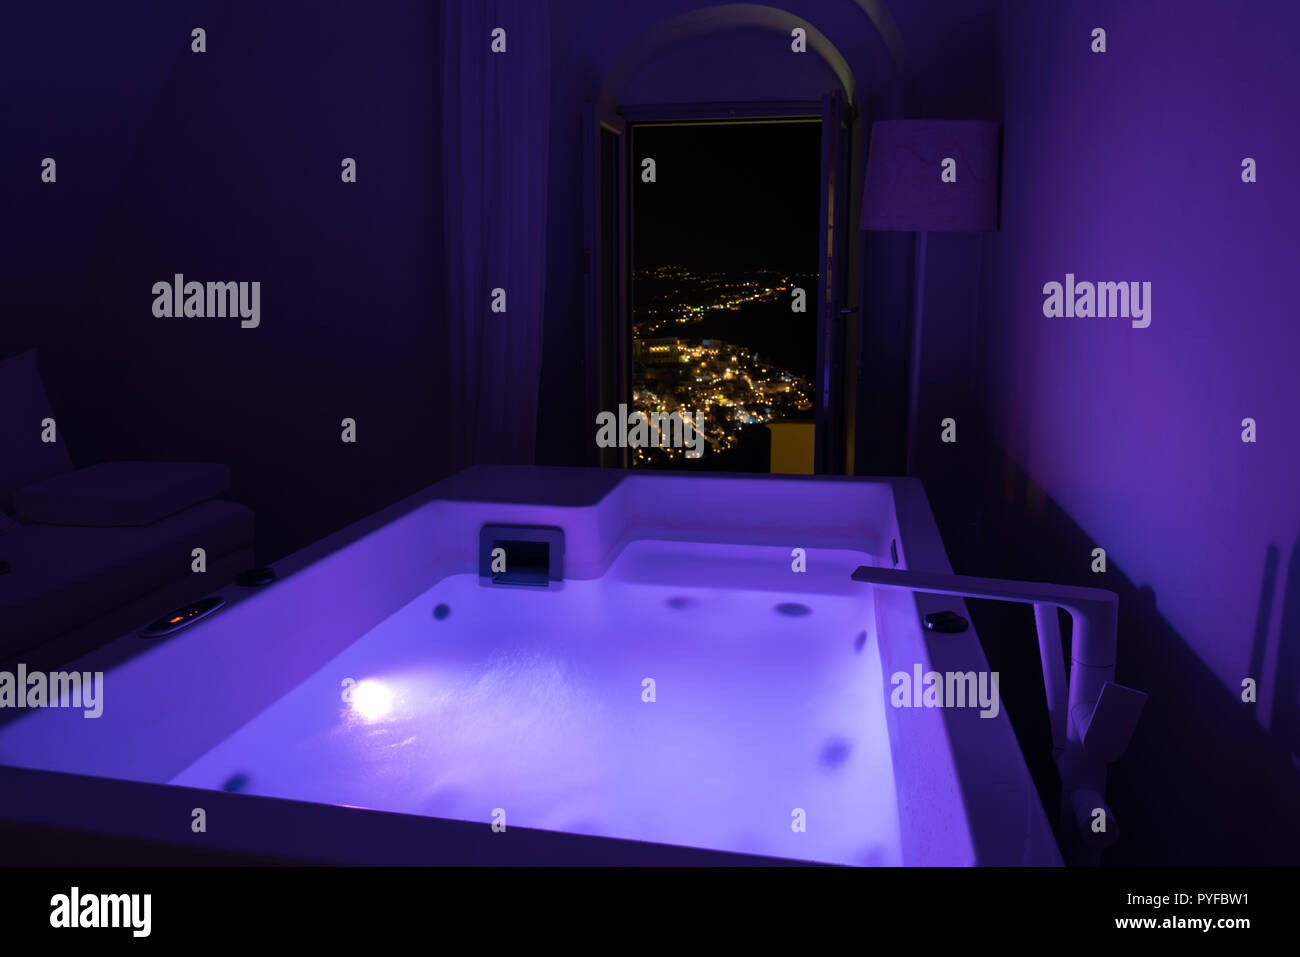 Luxury Travel Santorini Vacation Hotel Jacuzzi In Colored